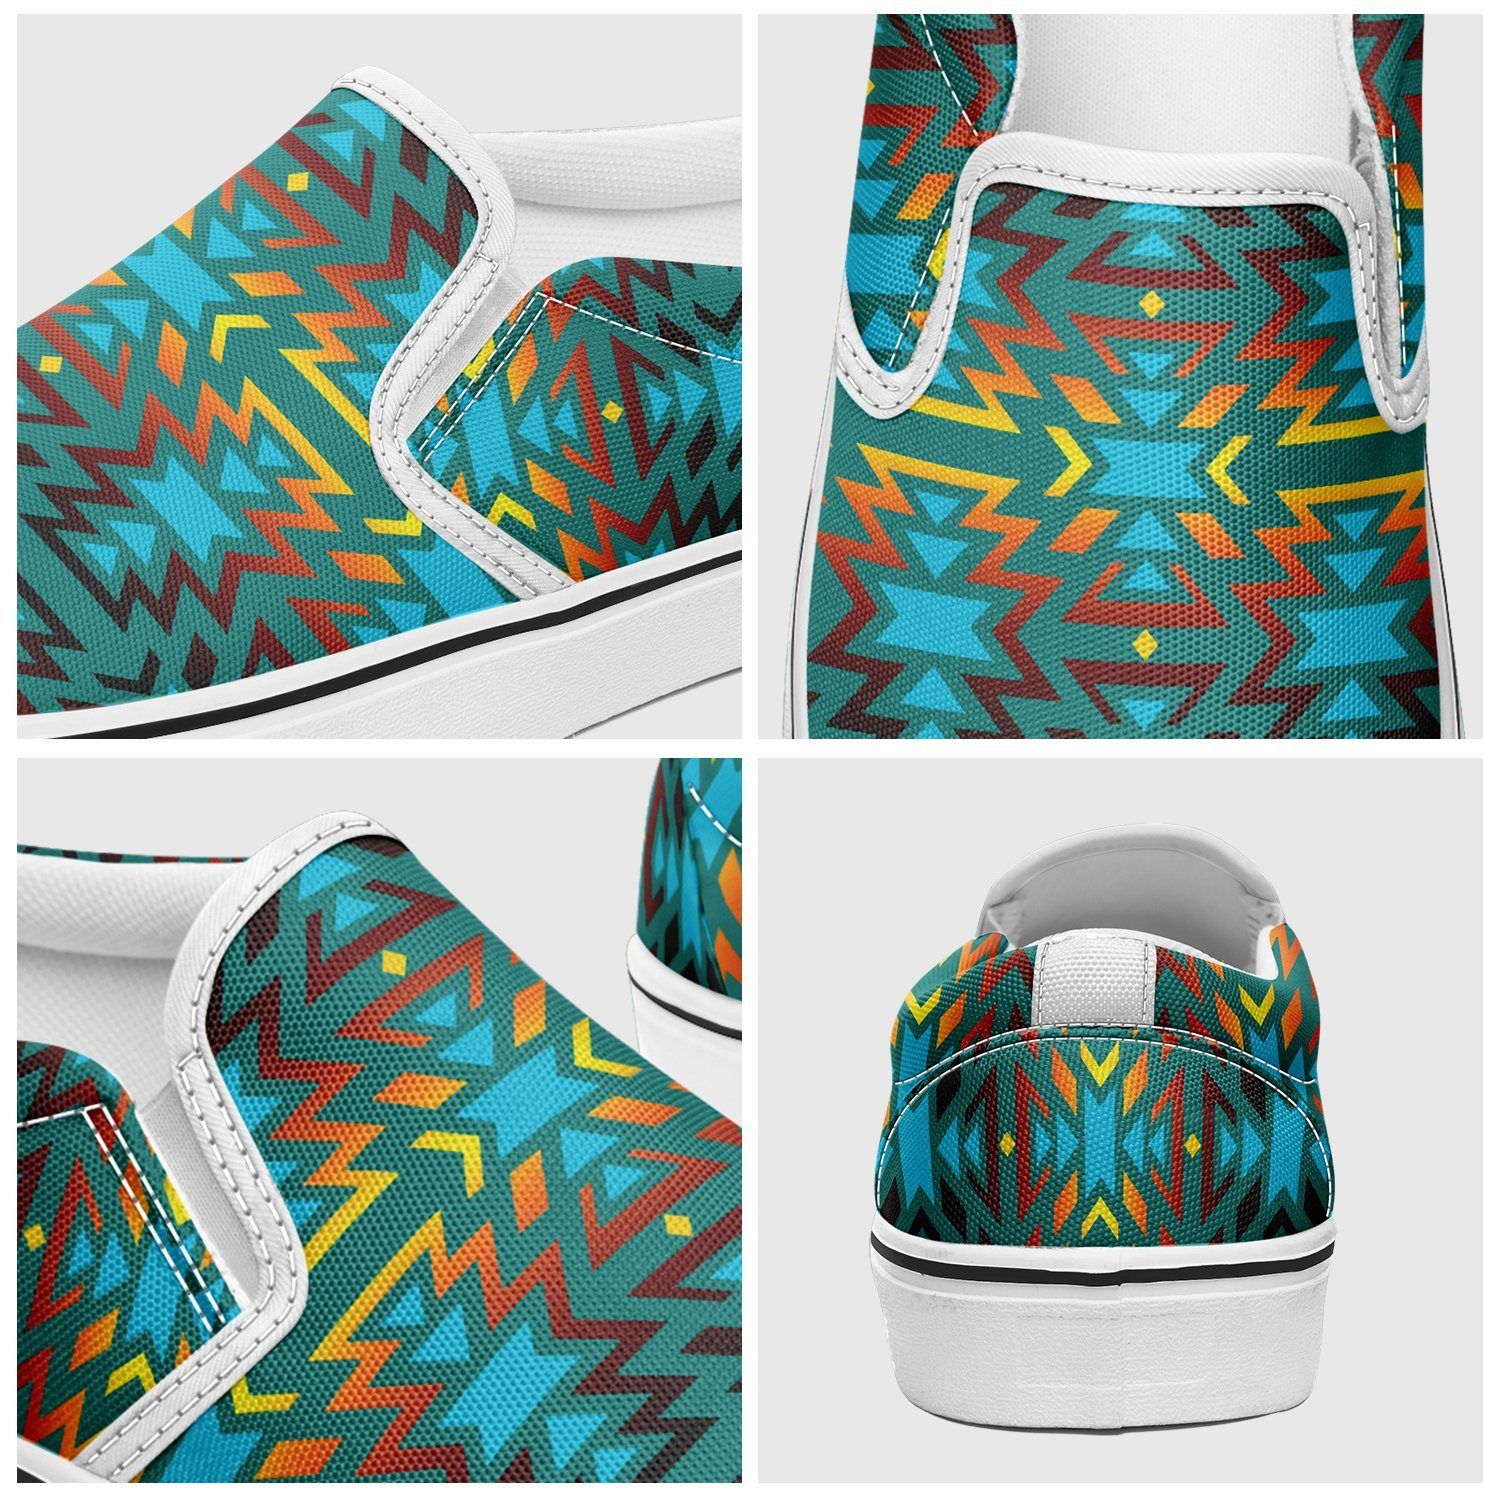 Fire Colors and Turquoise Teal Otoyimm Kid's Canvas Slip On Shoes 49 Dzine 